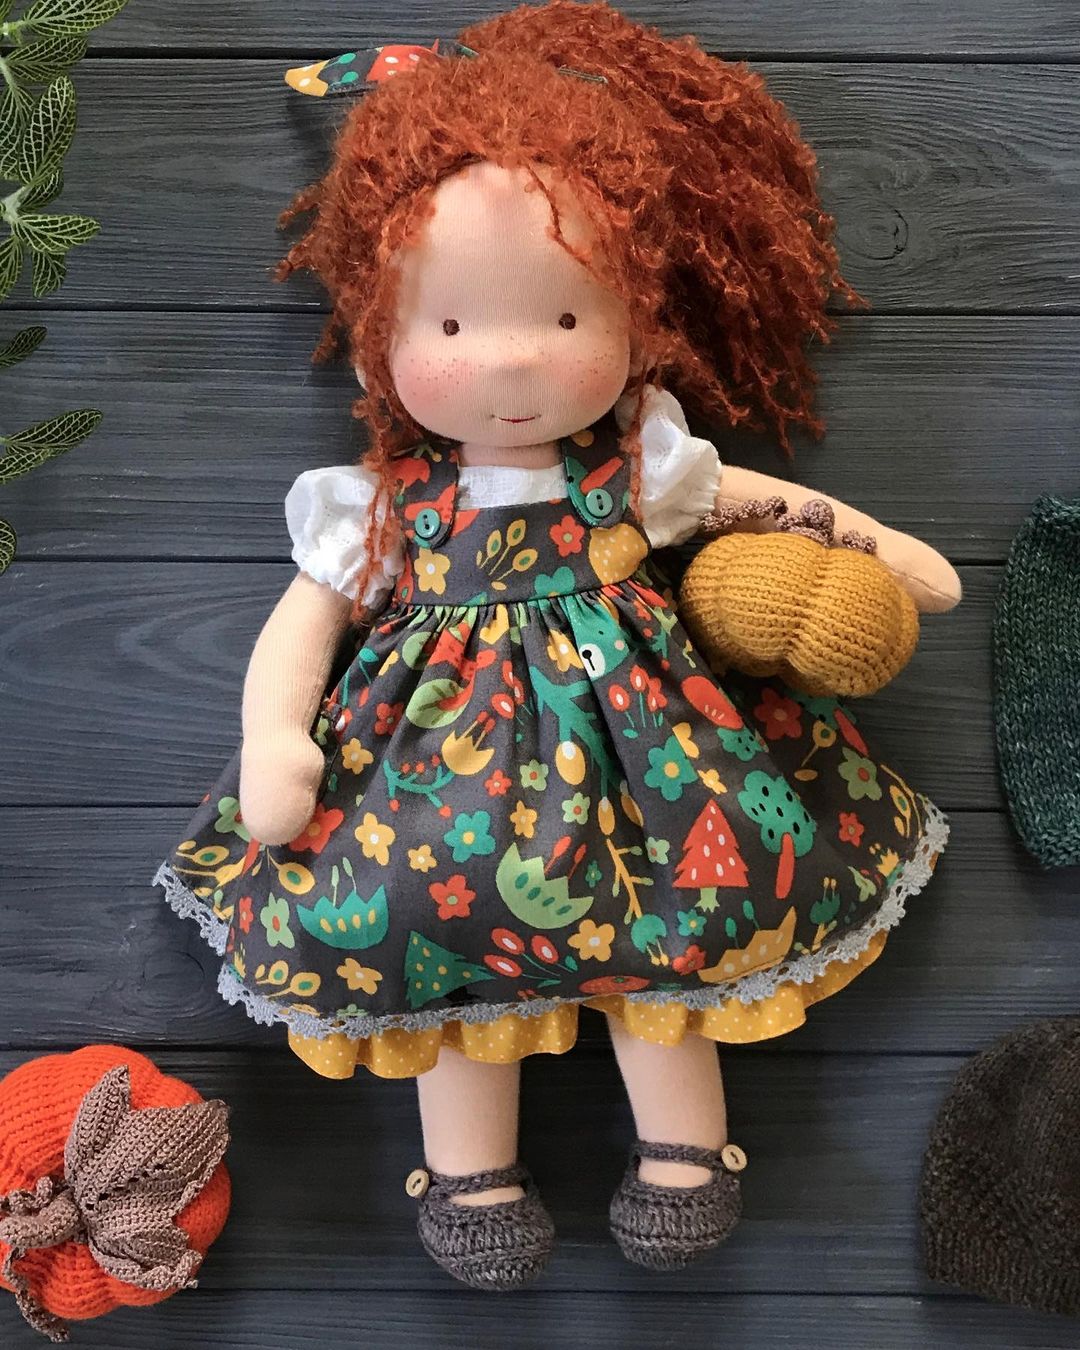 Peperudas Dolls - Handmade Waldorf Doll Taylor - The Best Gift for Christmas